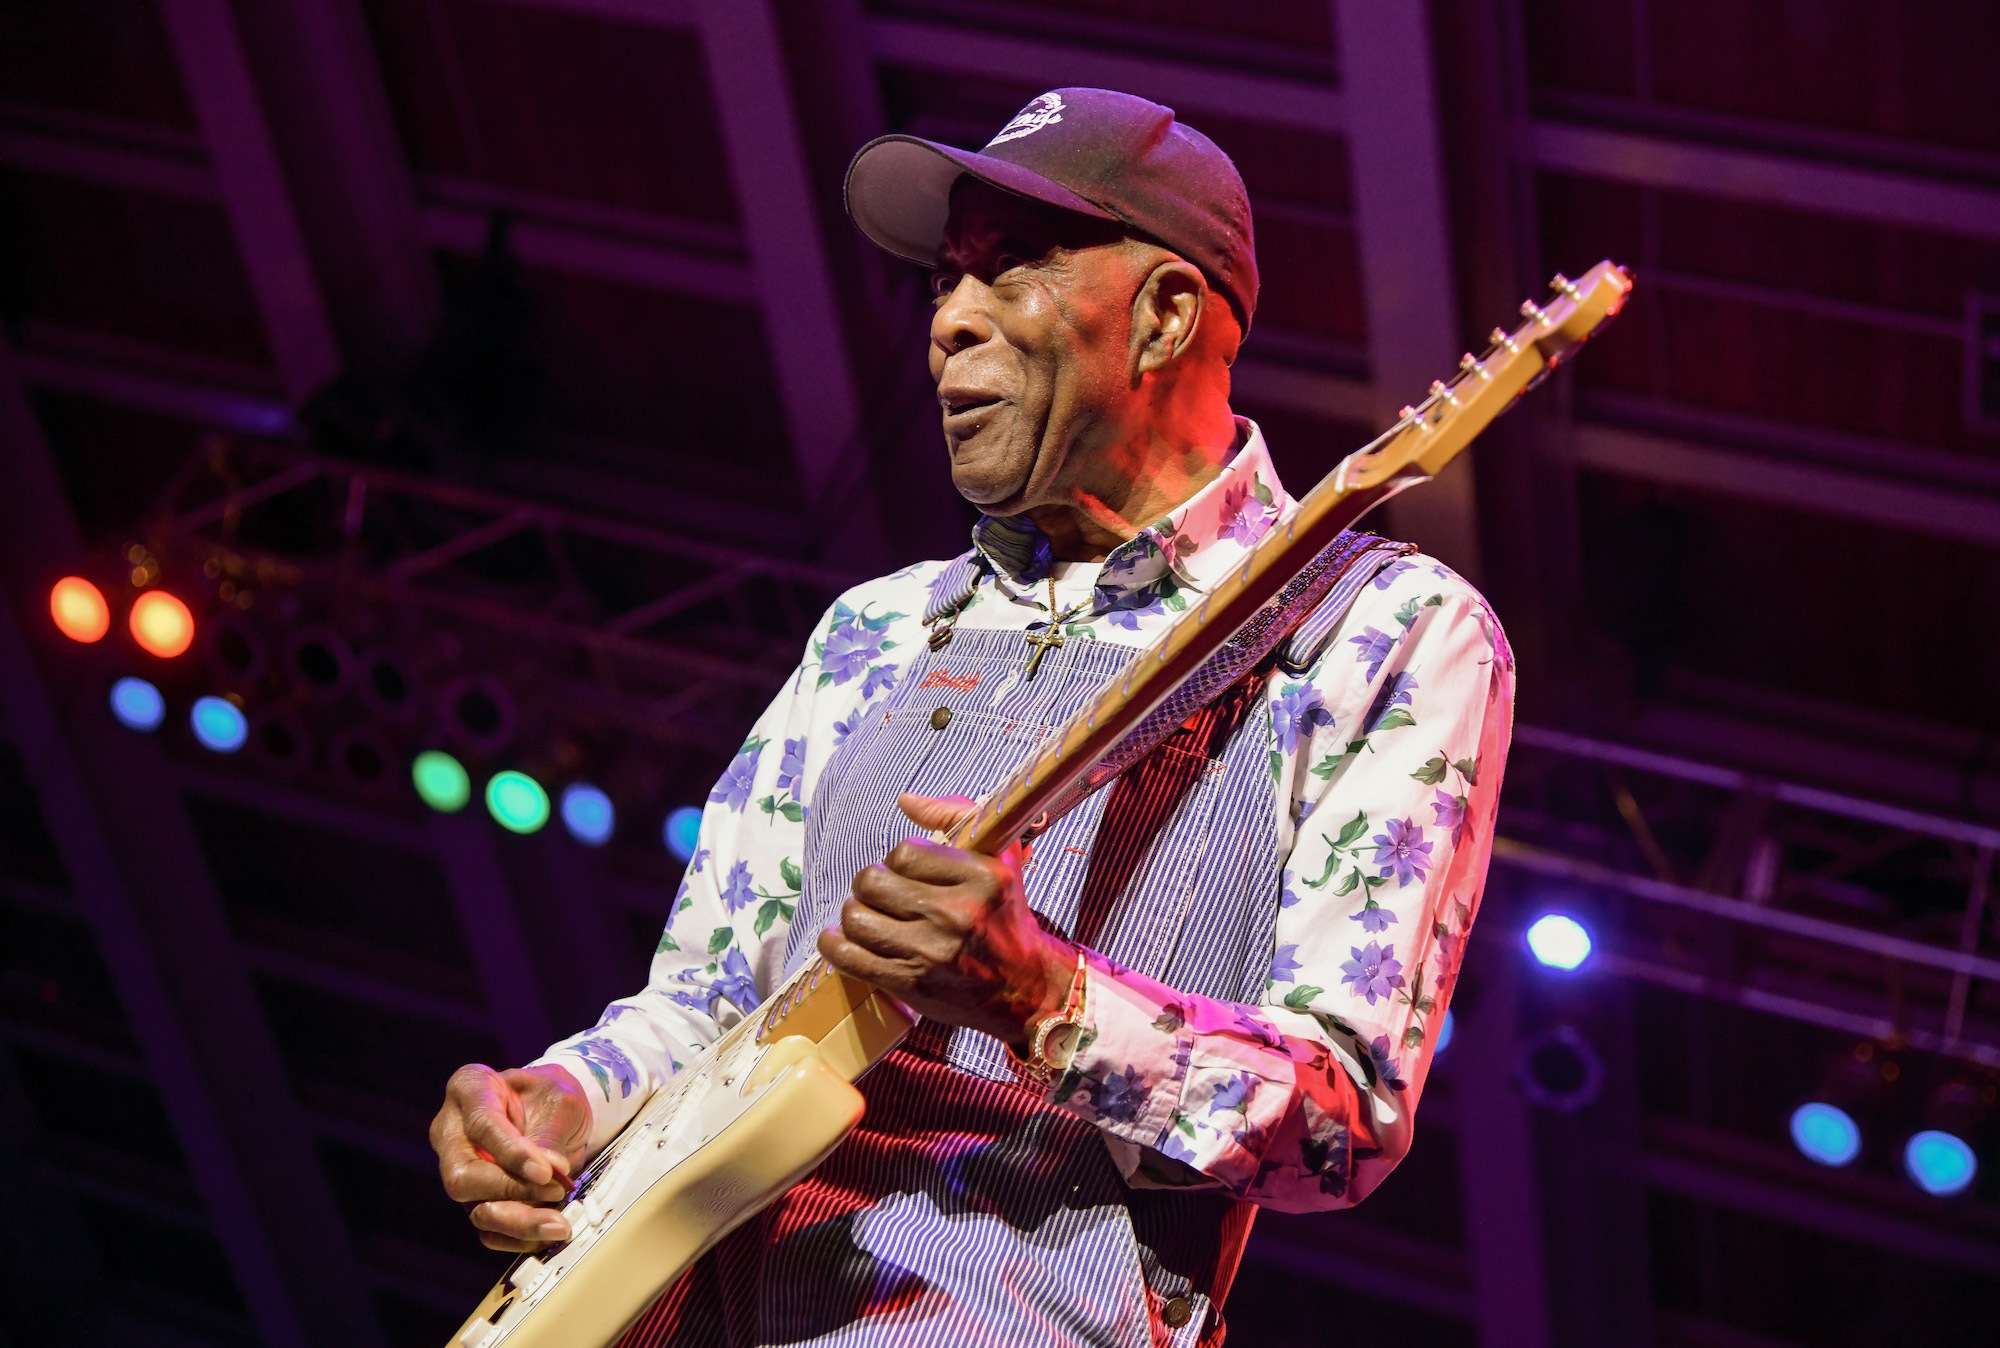 Buddy Guy Live At Blues On The Fox [GALLERY] 11